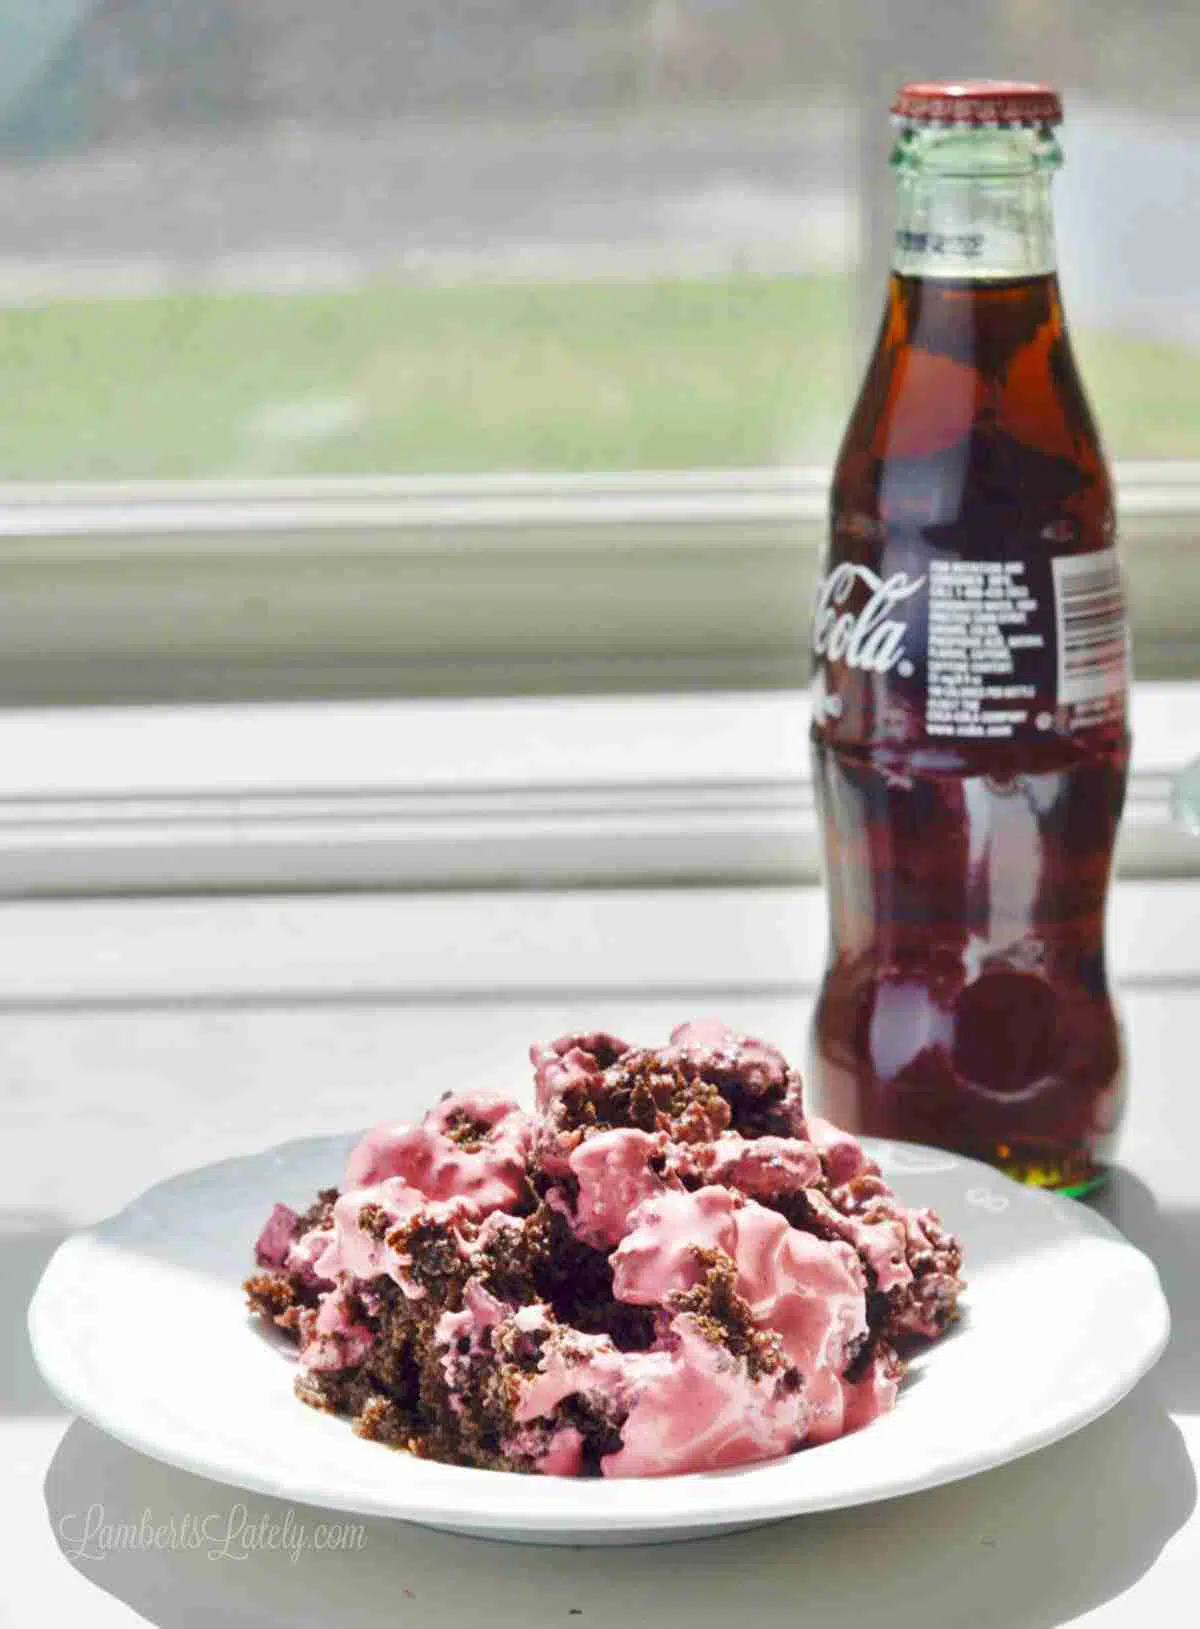 cherry coke earthquake cake on a white plate, with a glass bottle of coca cola.